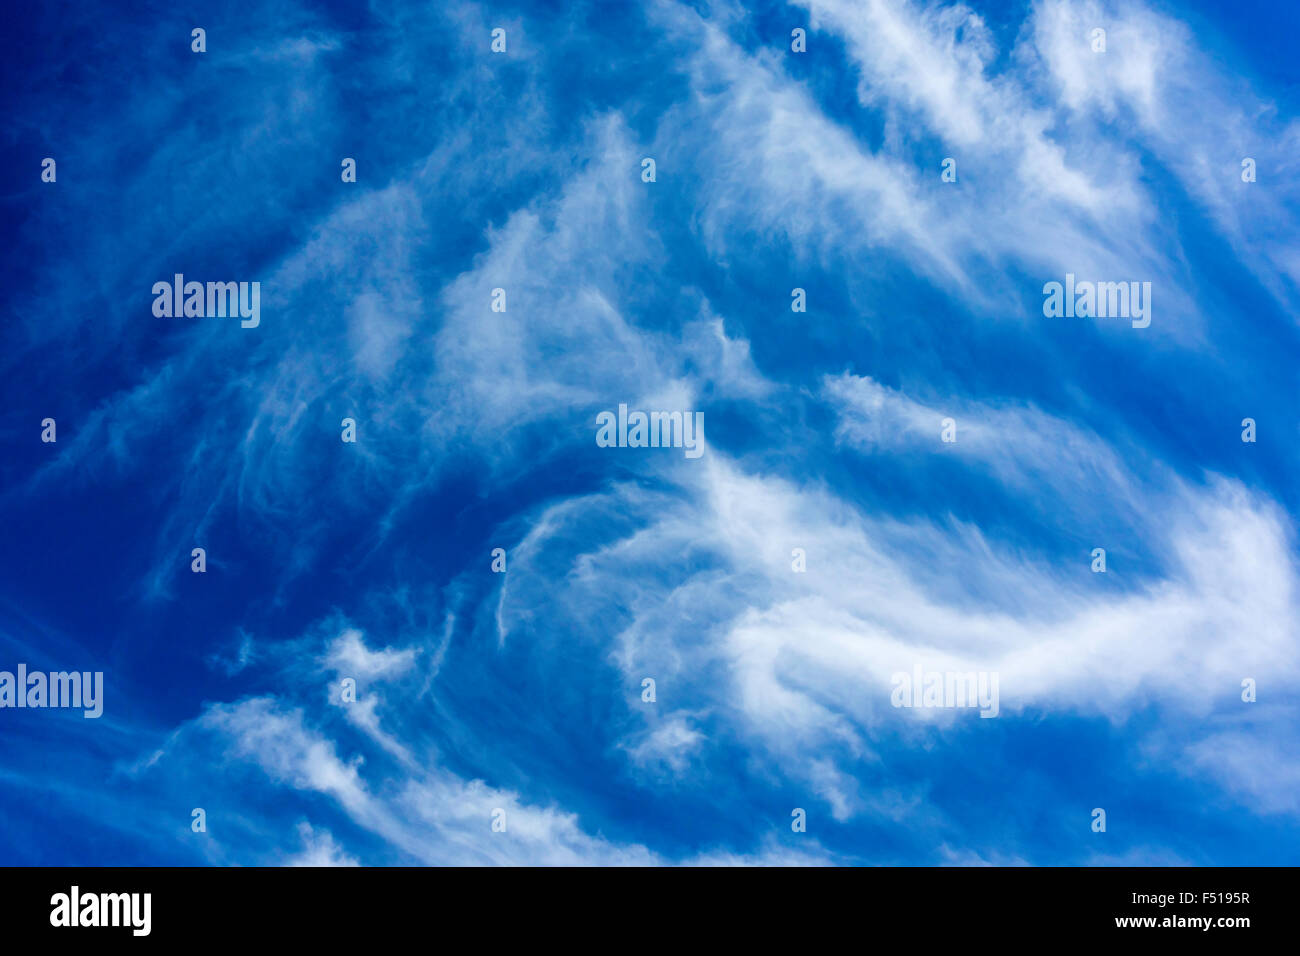 Meteorology jet stream cirrus clouds showing a vigorous cyclonic condition exists upwind and gales may arrive soon Stock Photo